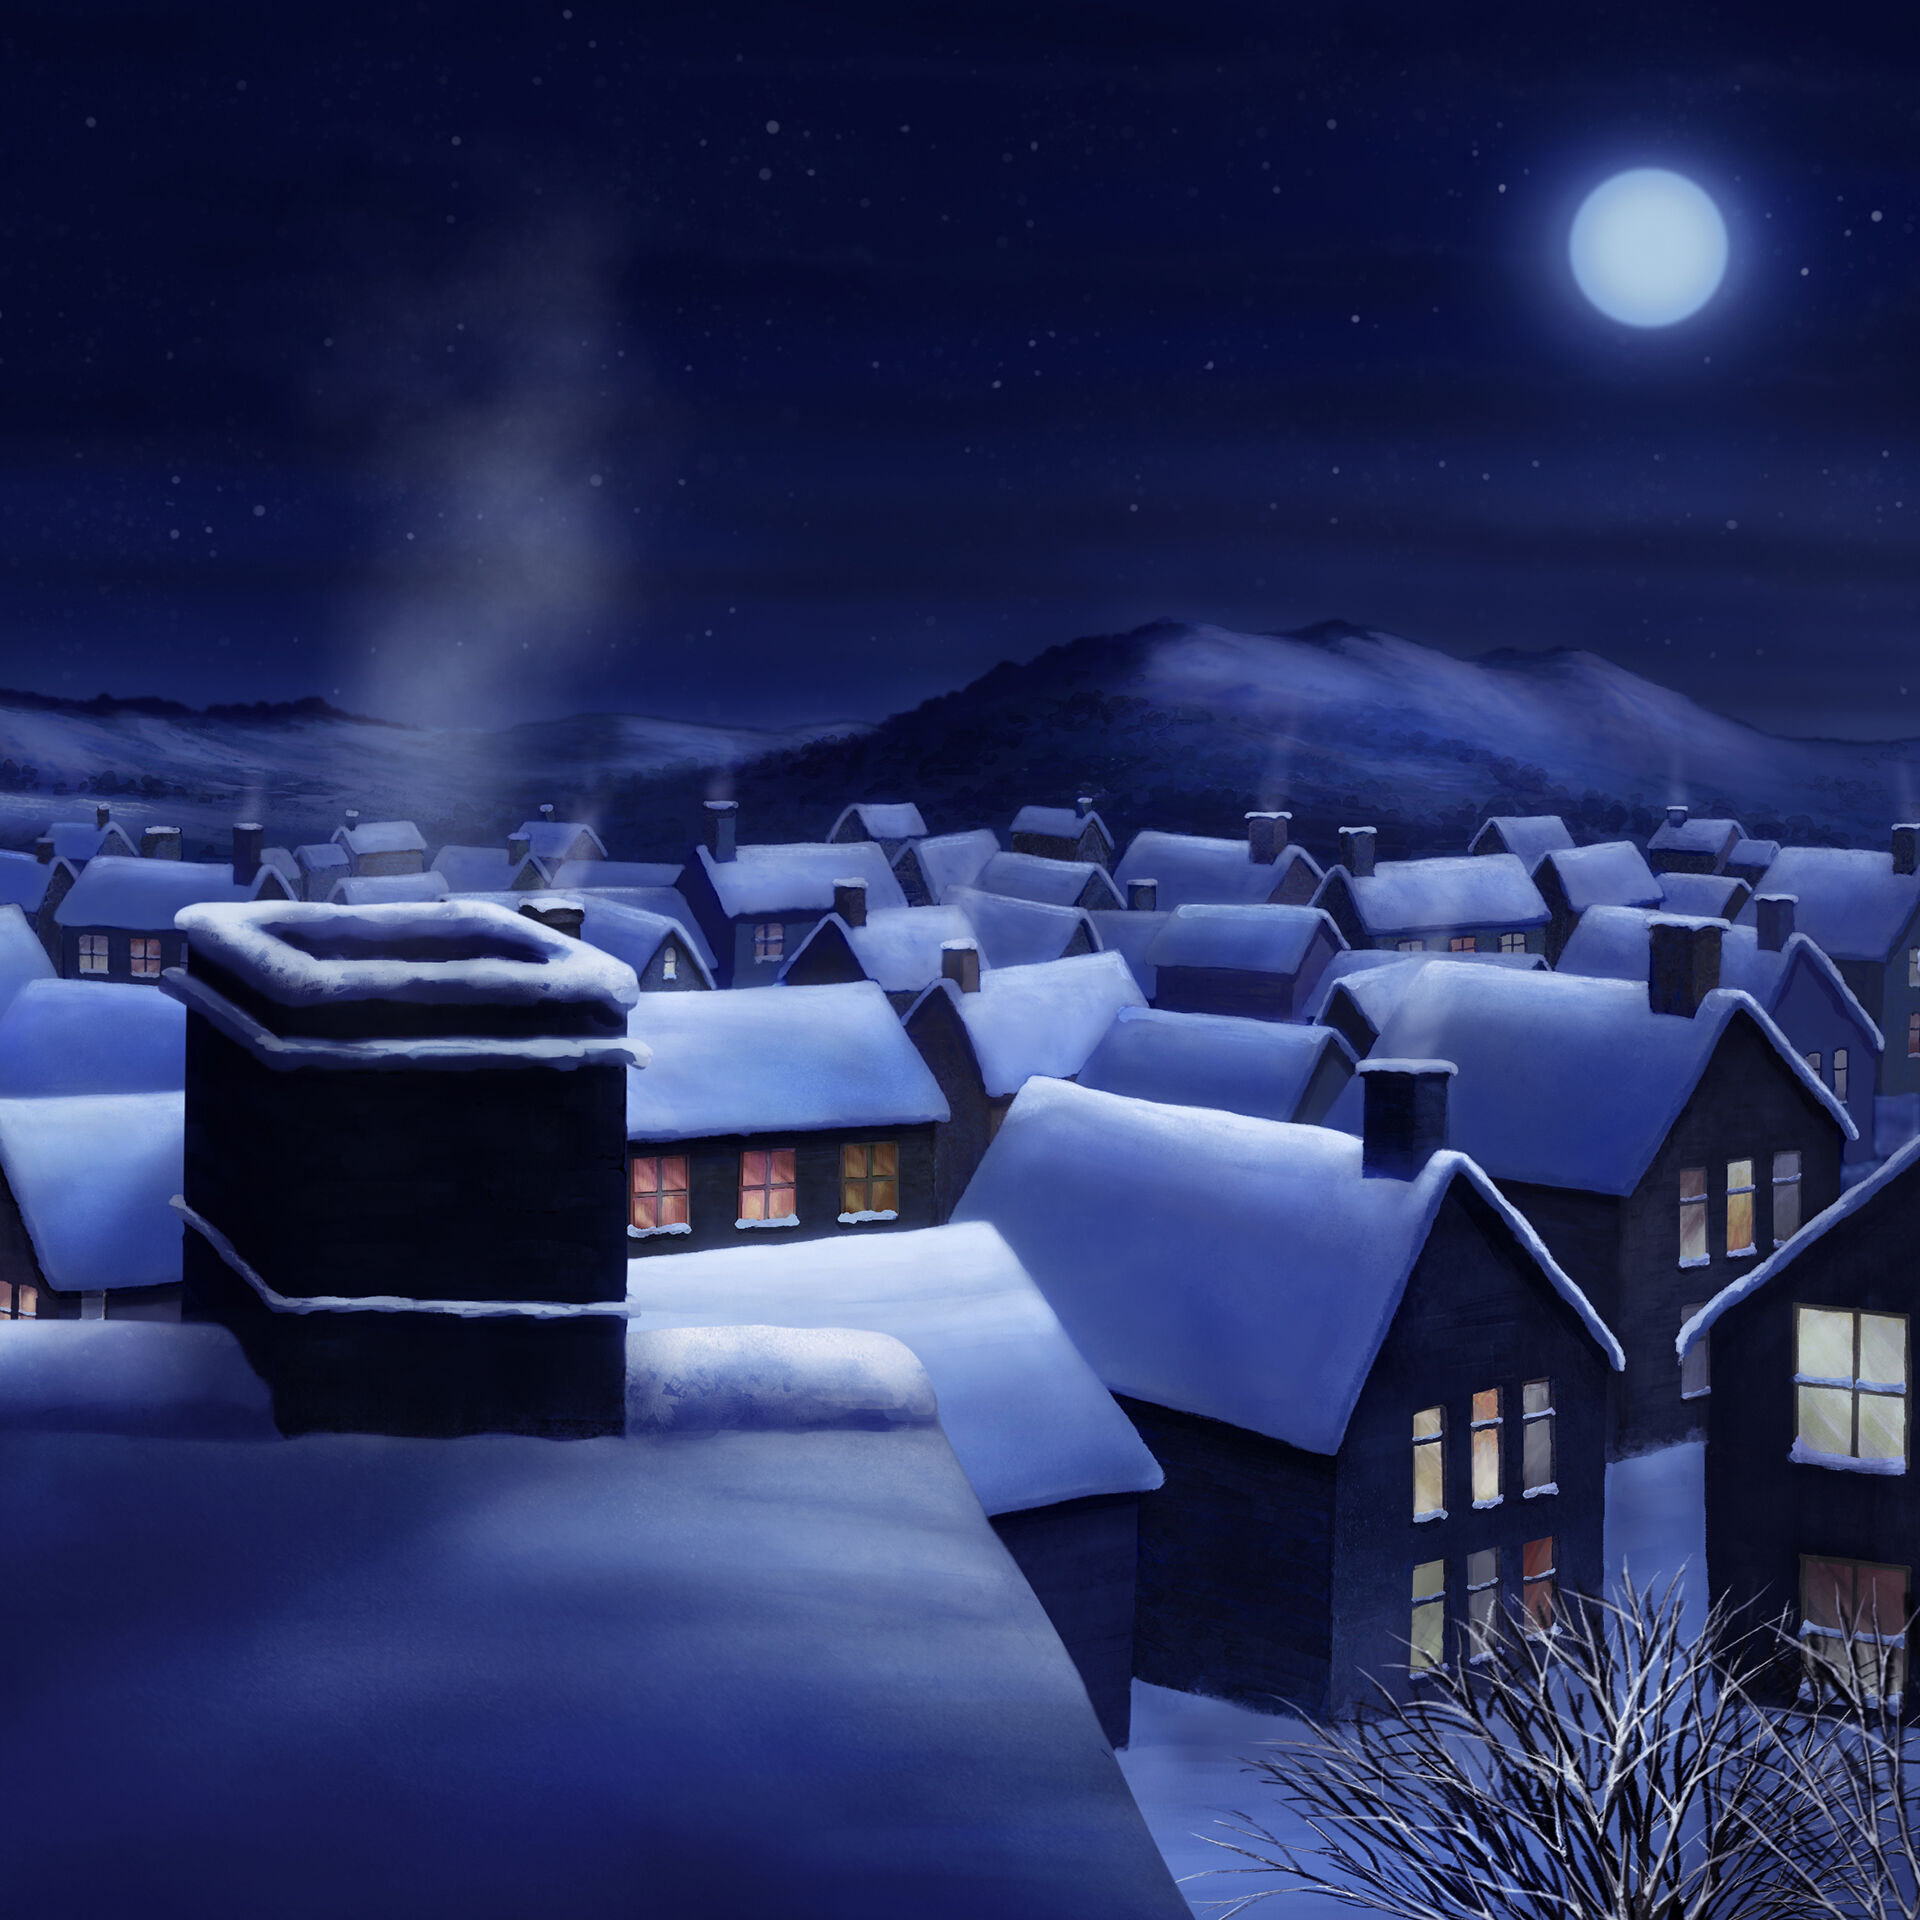 Illustration of Christmas town